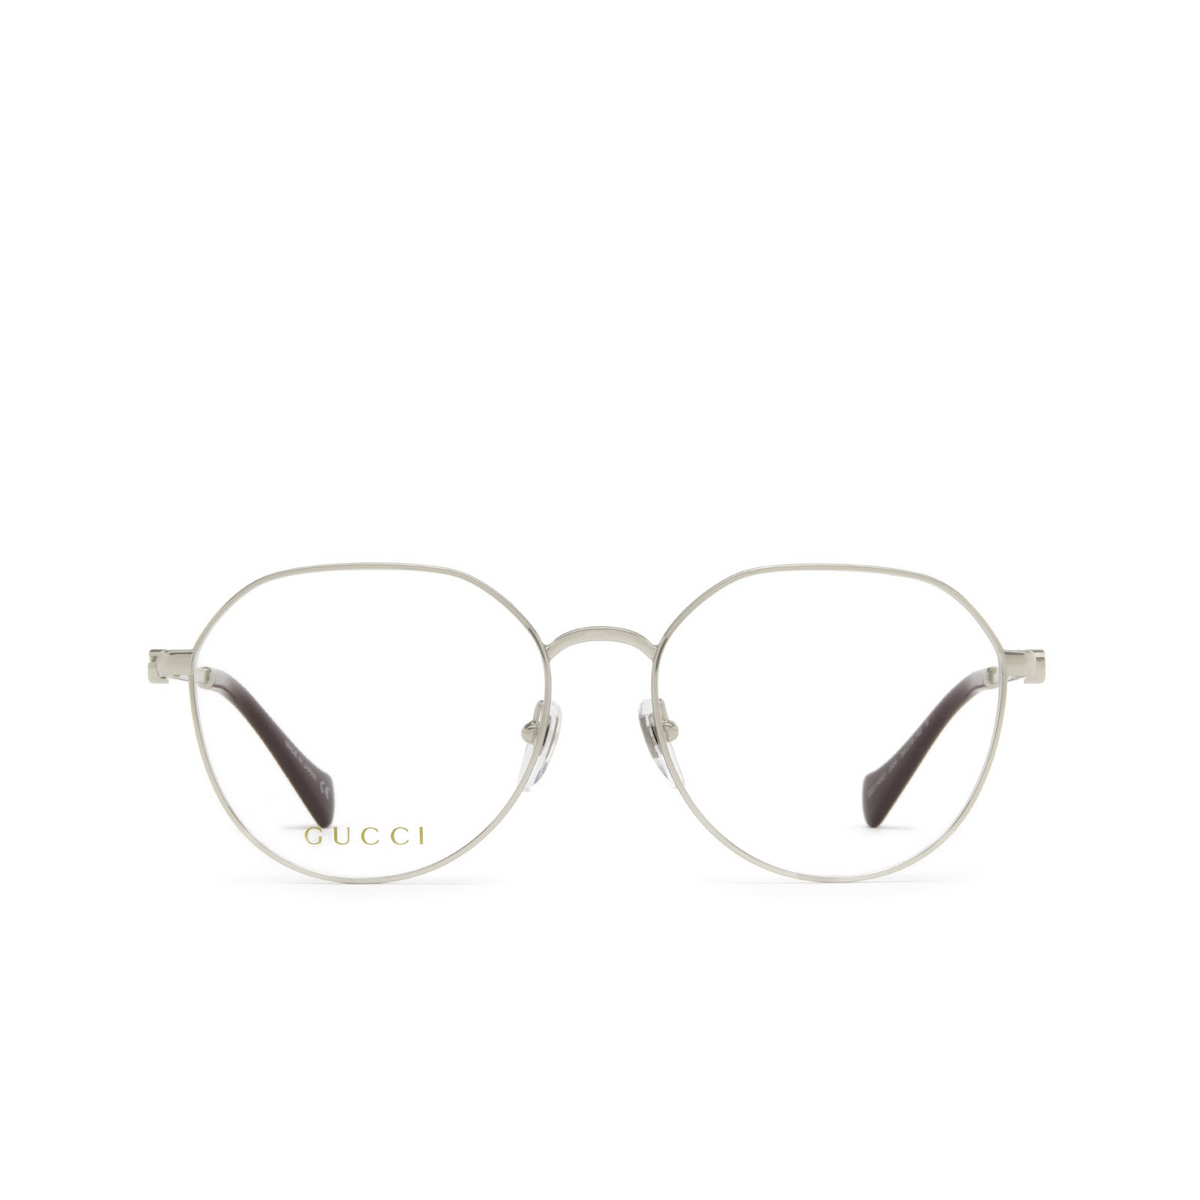 Gucci® Round Eyeglasses: GG1145O color Silver 004 - front view.